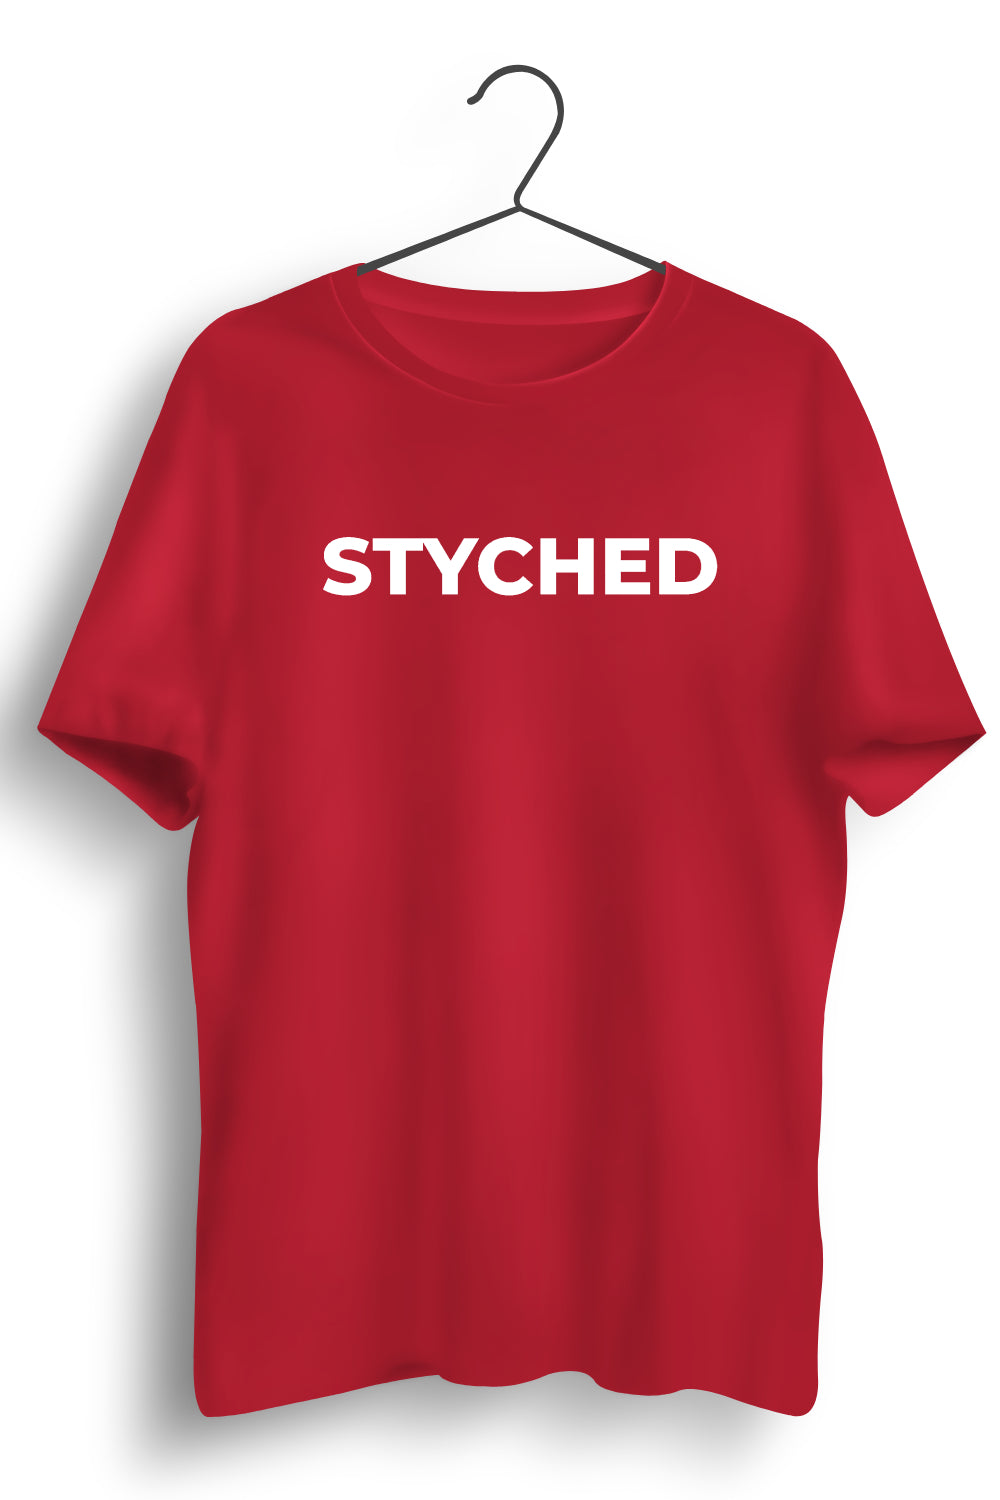 Paytm Exclusive - Styched Font Red Tshirt